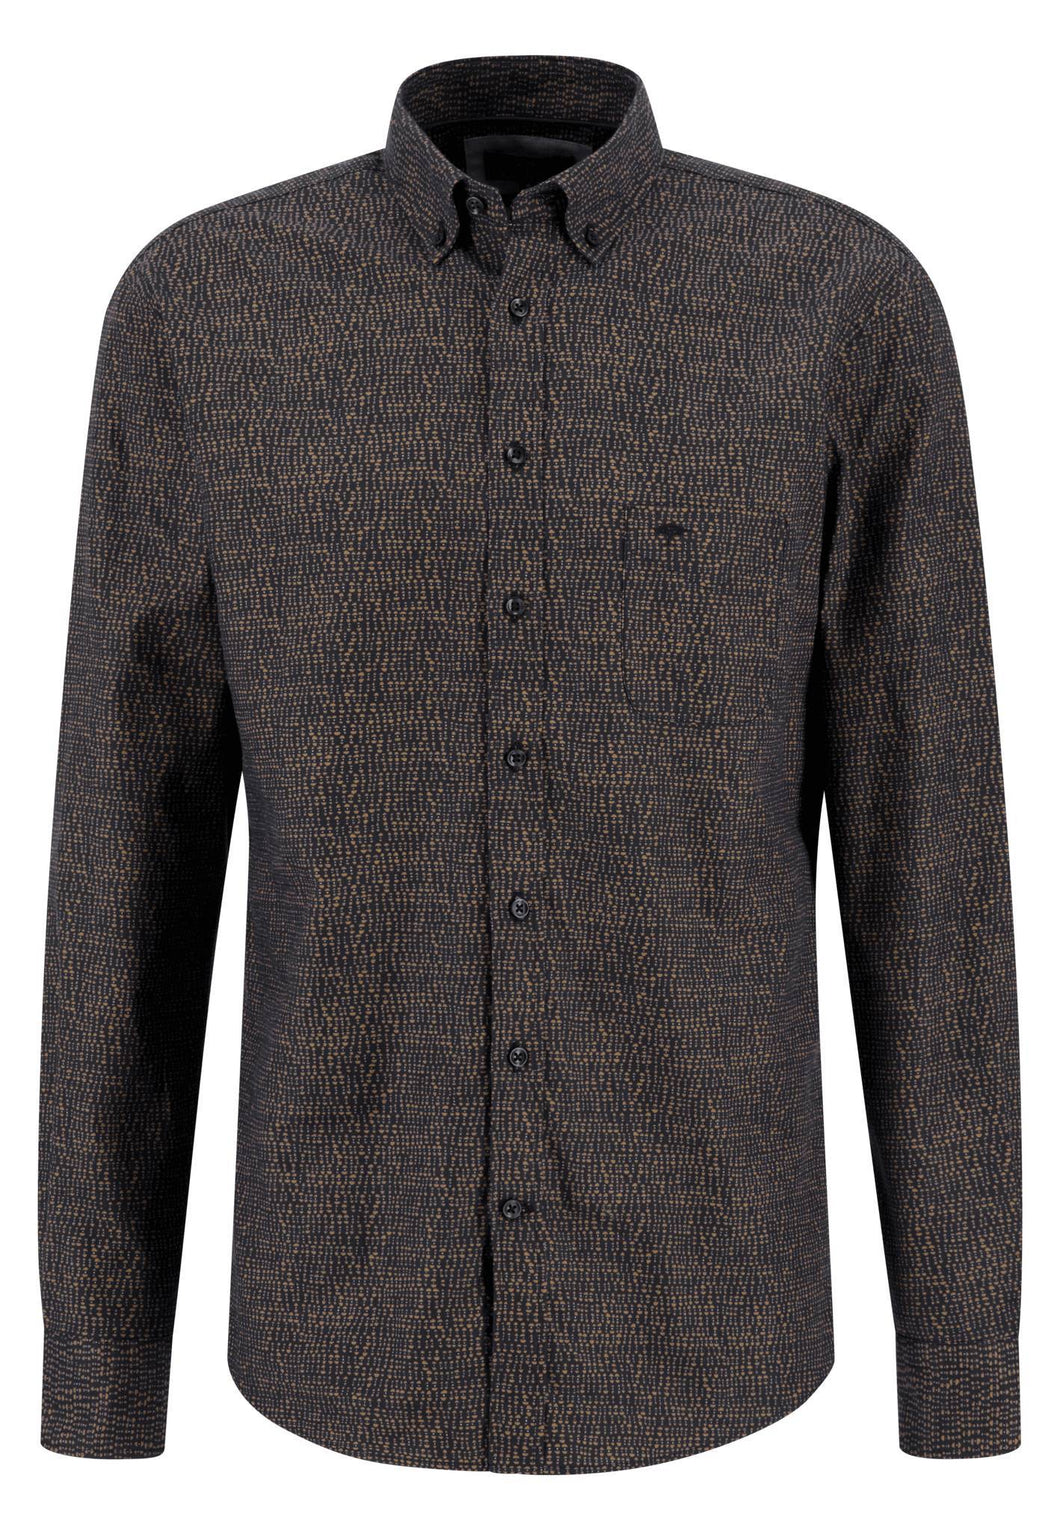 New Fynch Hatton Blue and Brown Long Sleeve Shirt